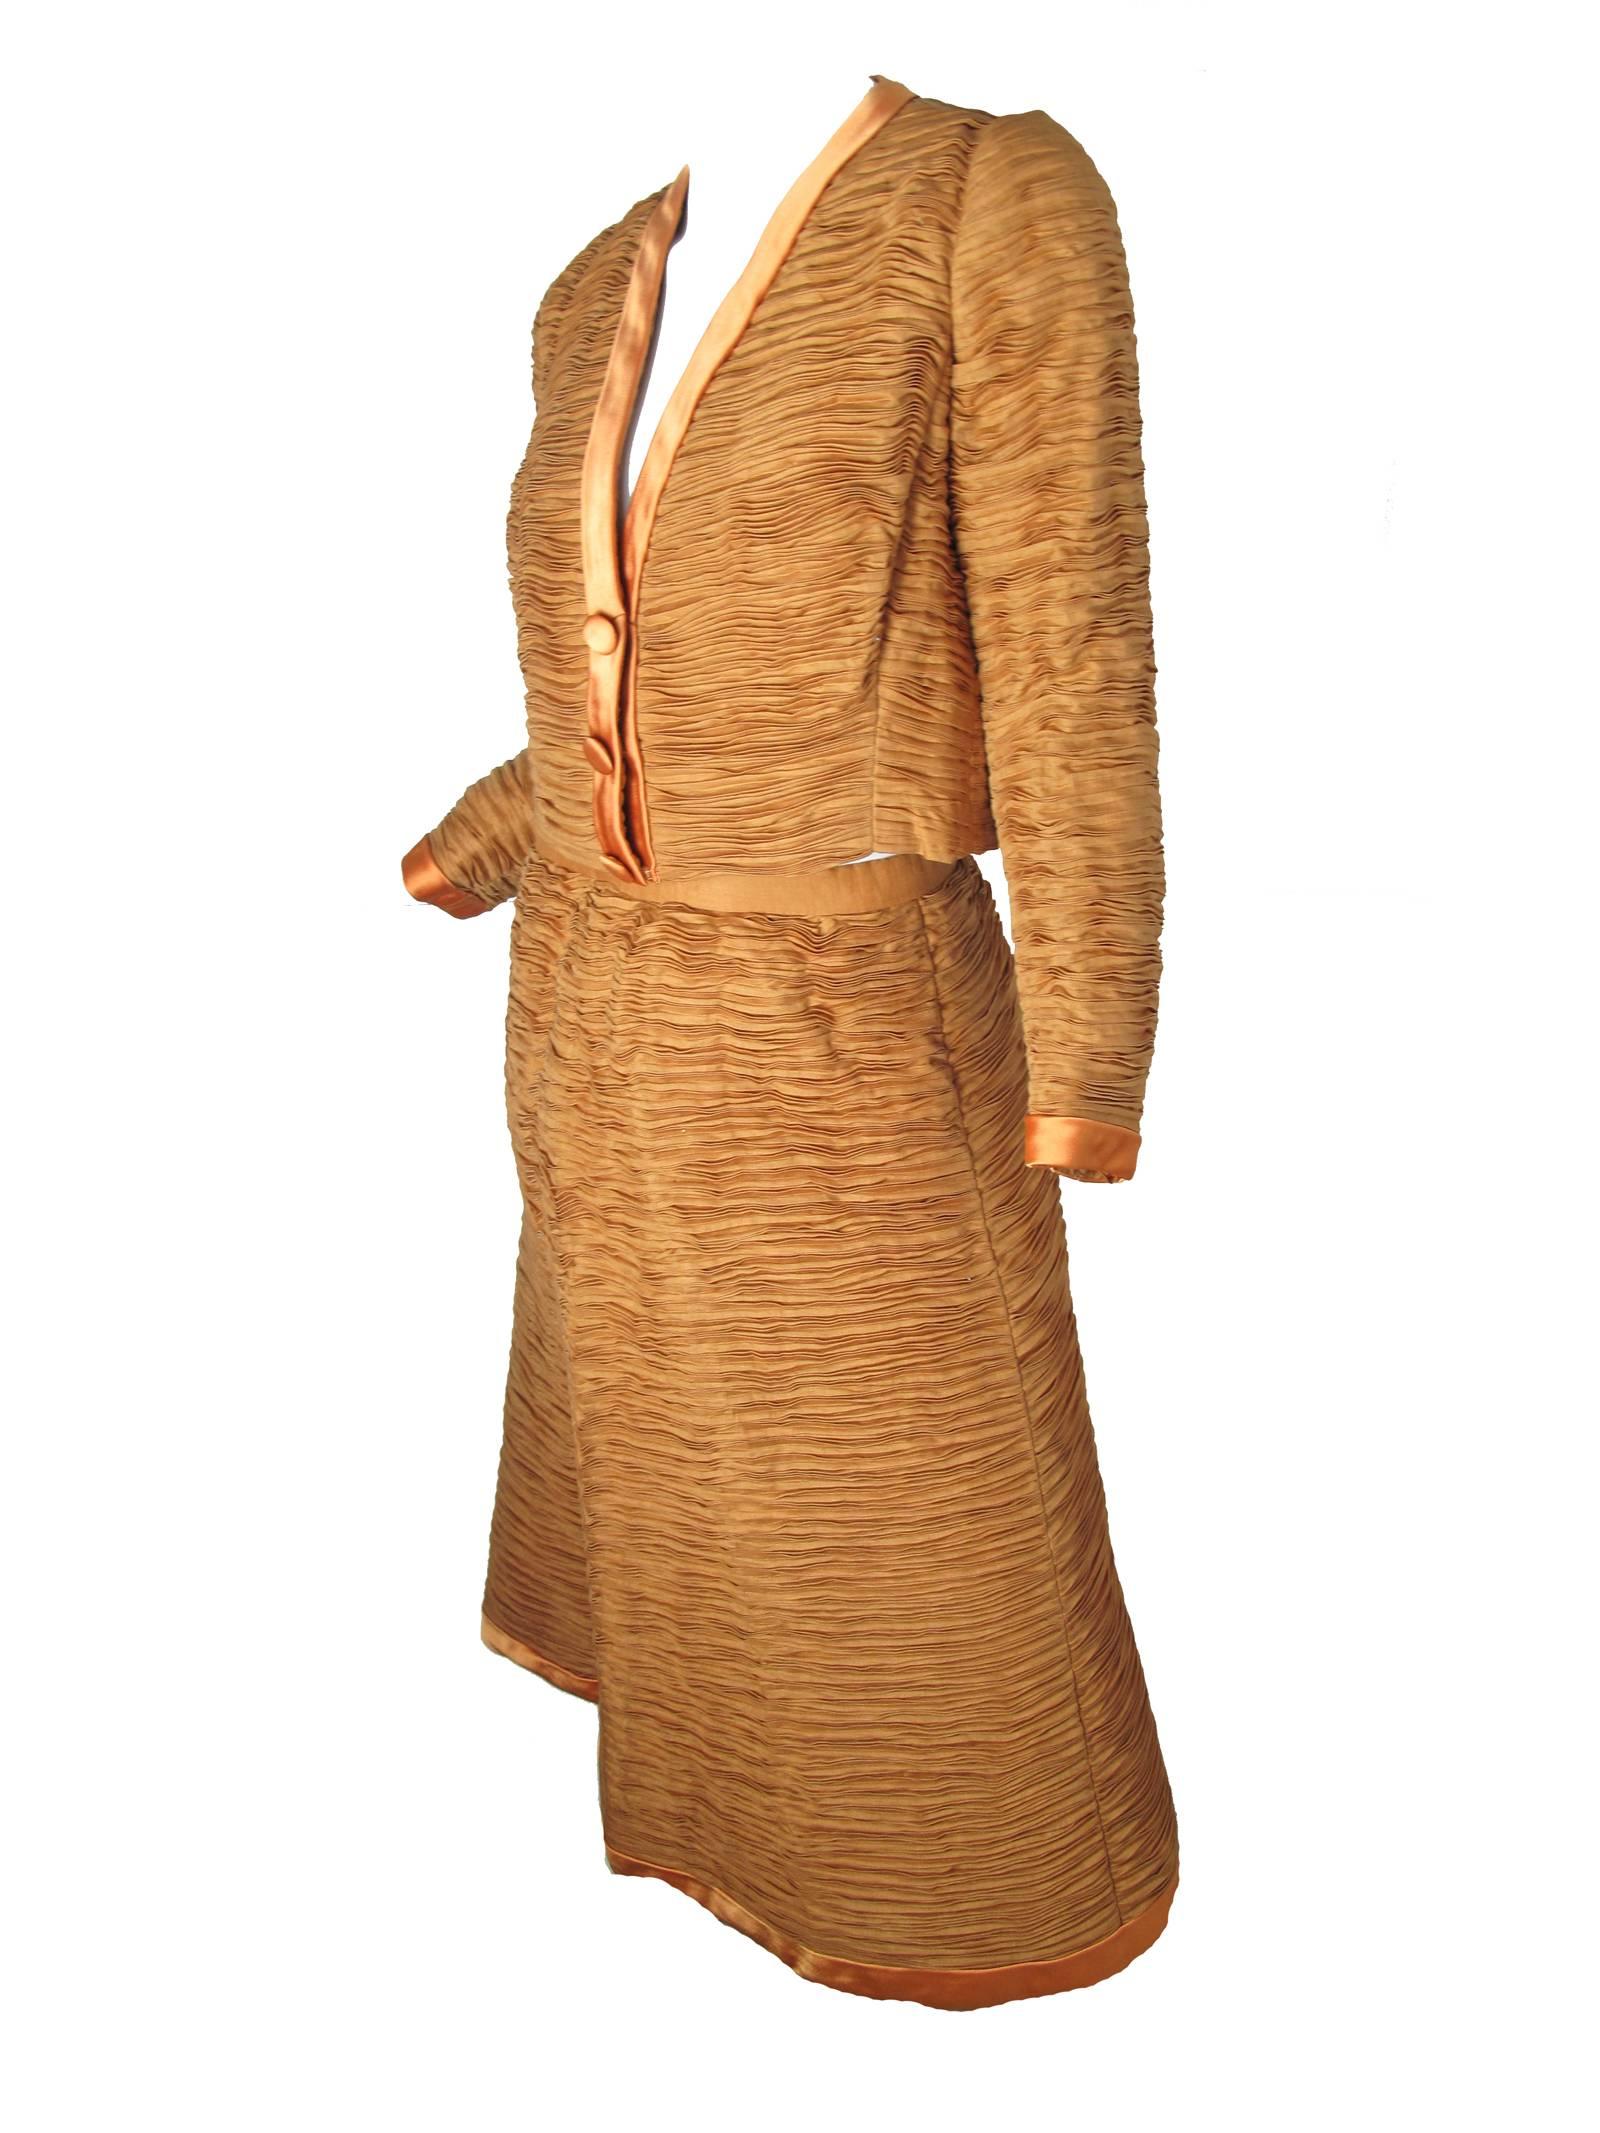 1960s Sybil Connolly Irish linen pleated jacket and skirt with satin trim.  Condition: Excellent. Size Medium

Jacket: 38